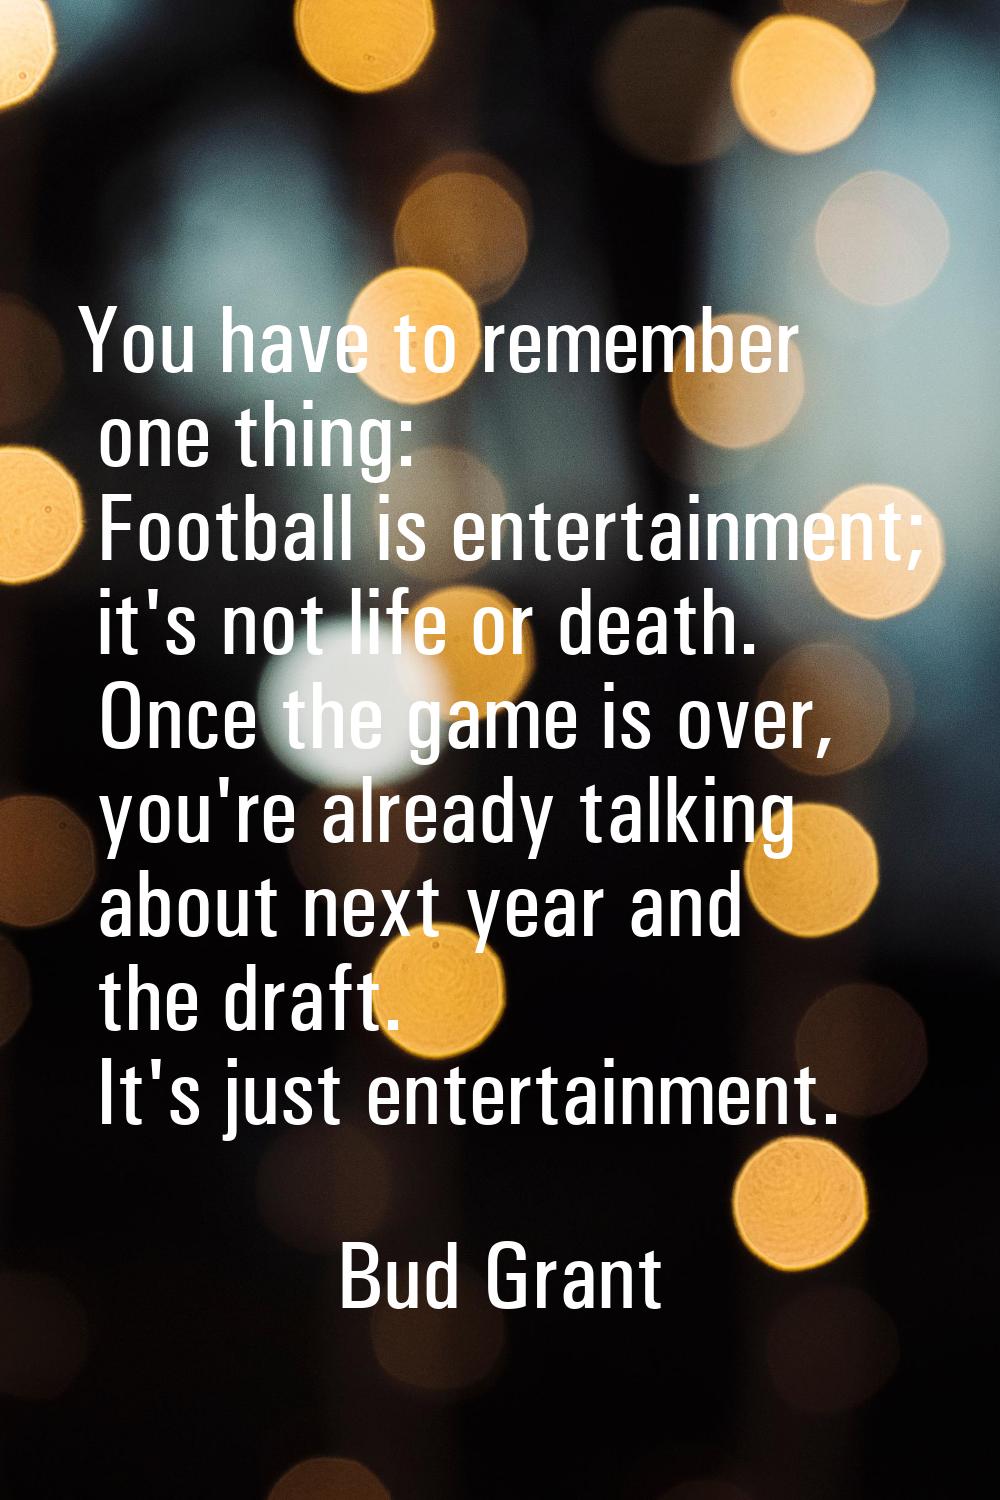 You have to remember one thing: Football is entertainment; it's not life or death. Once the game is